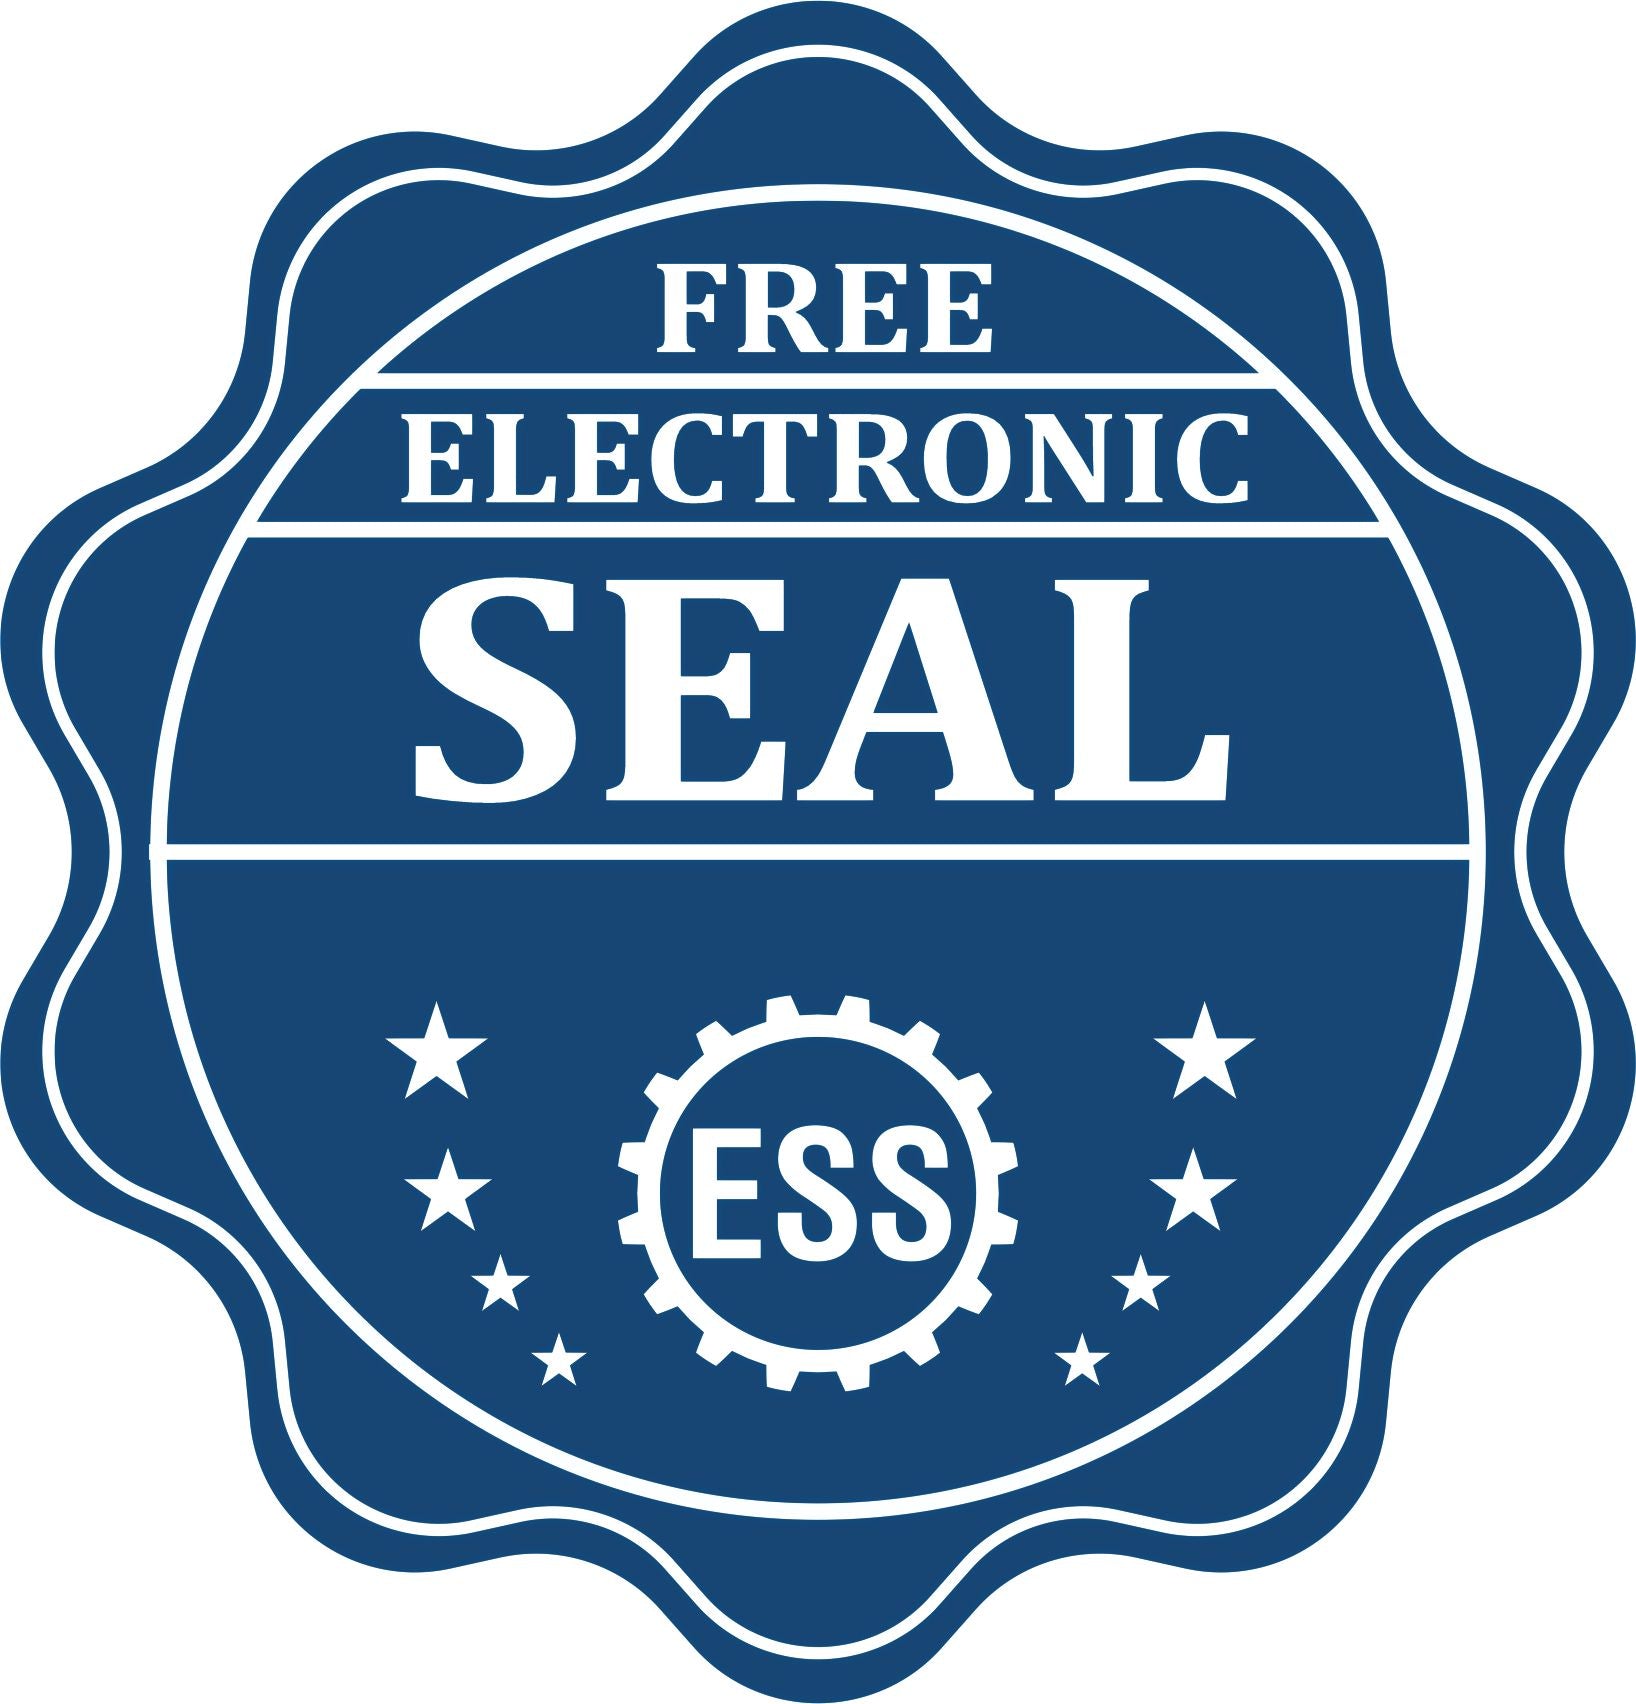 A badge showing a free electronic seal for the Oklahoma Geologist Desk Seal with stars and the ESS gear on the emblem.